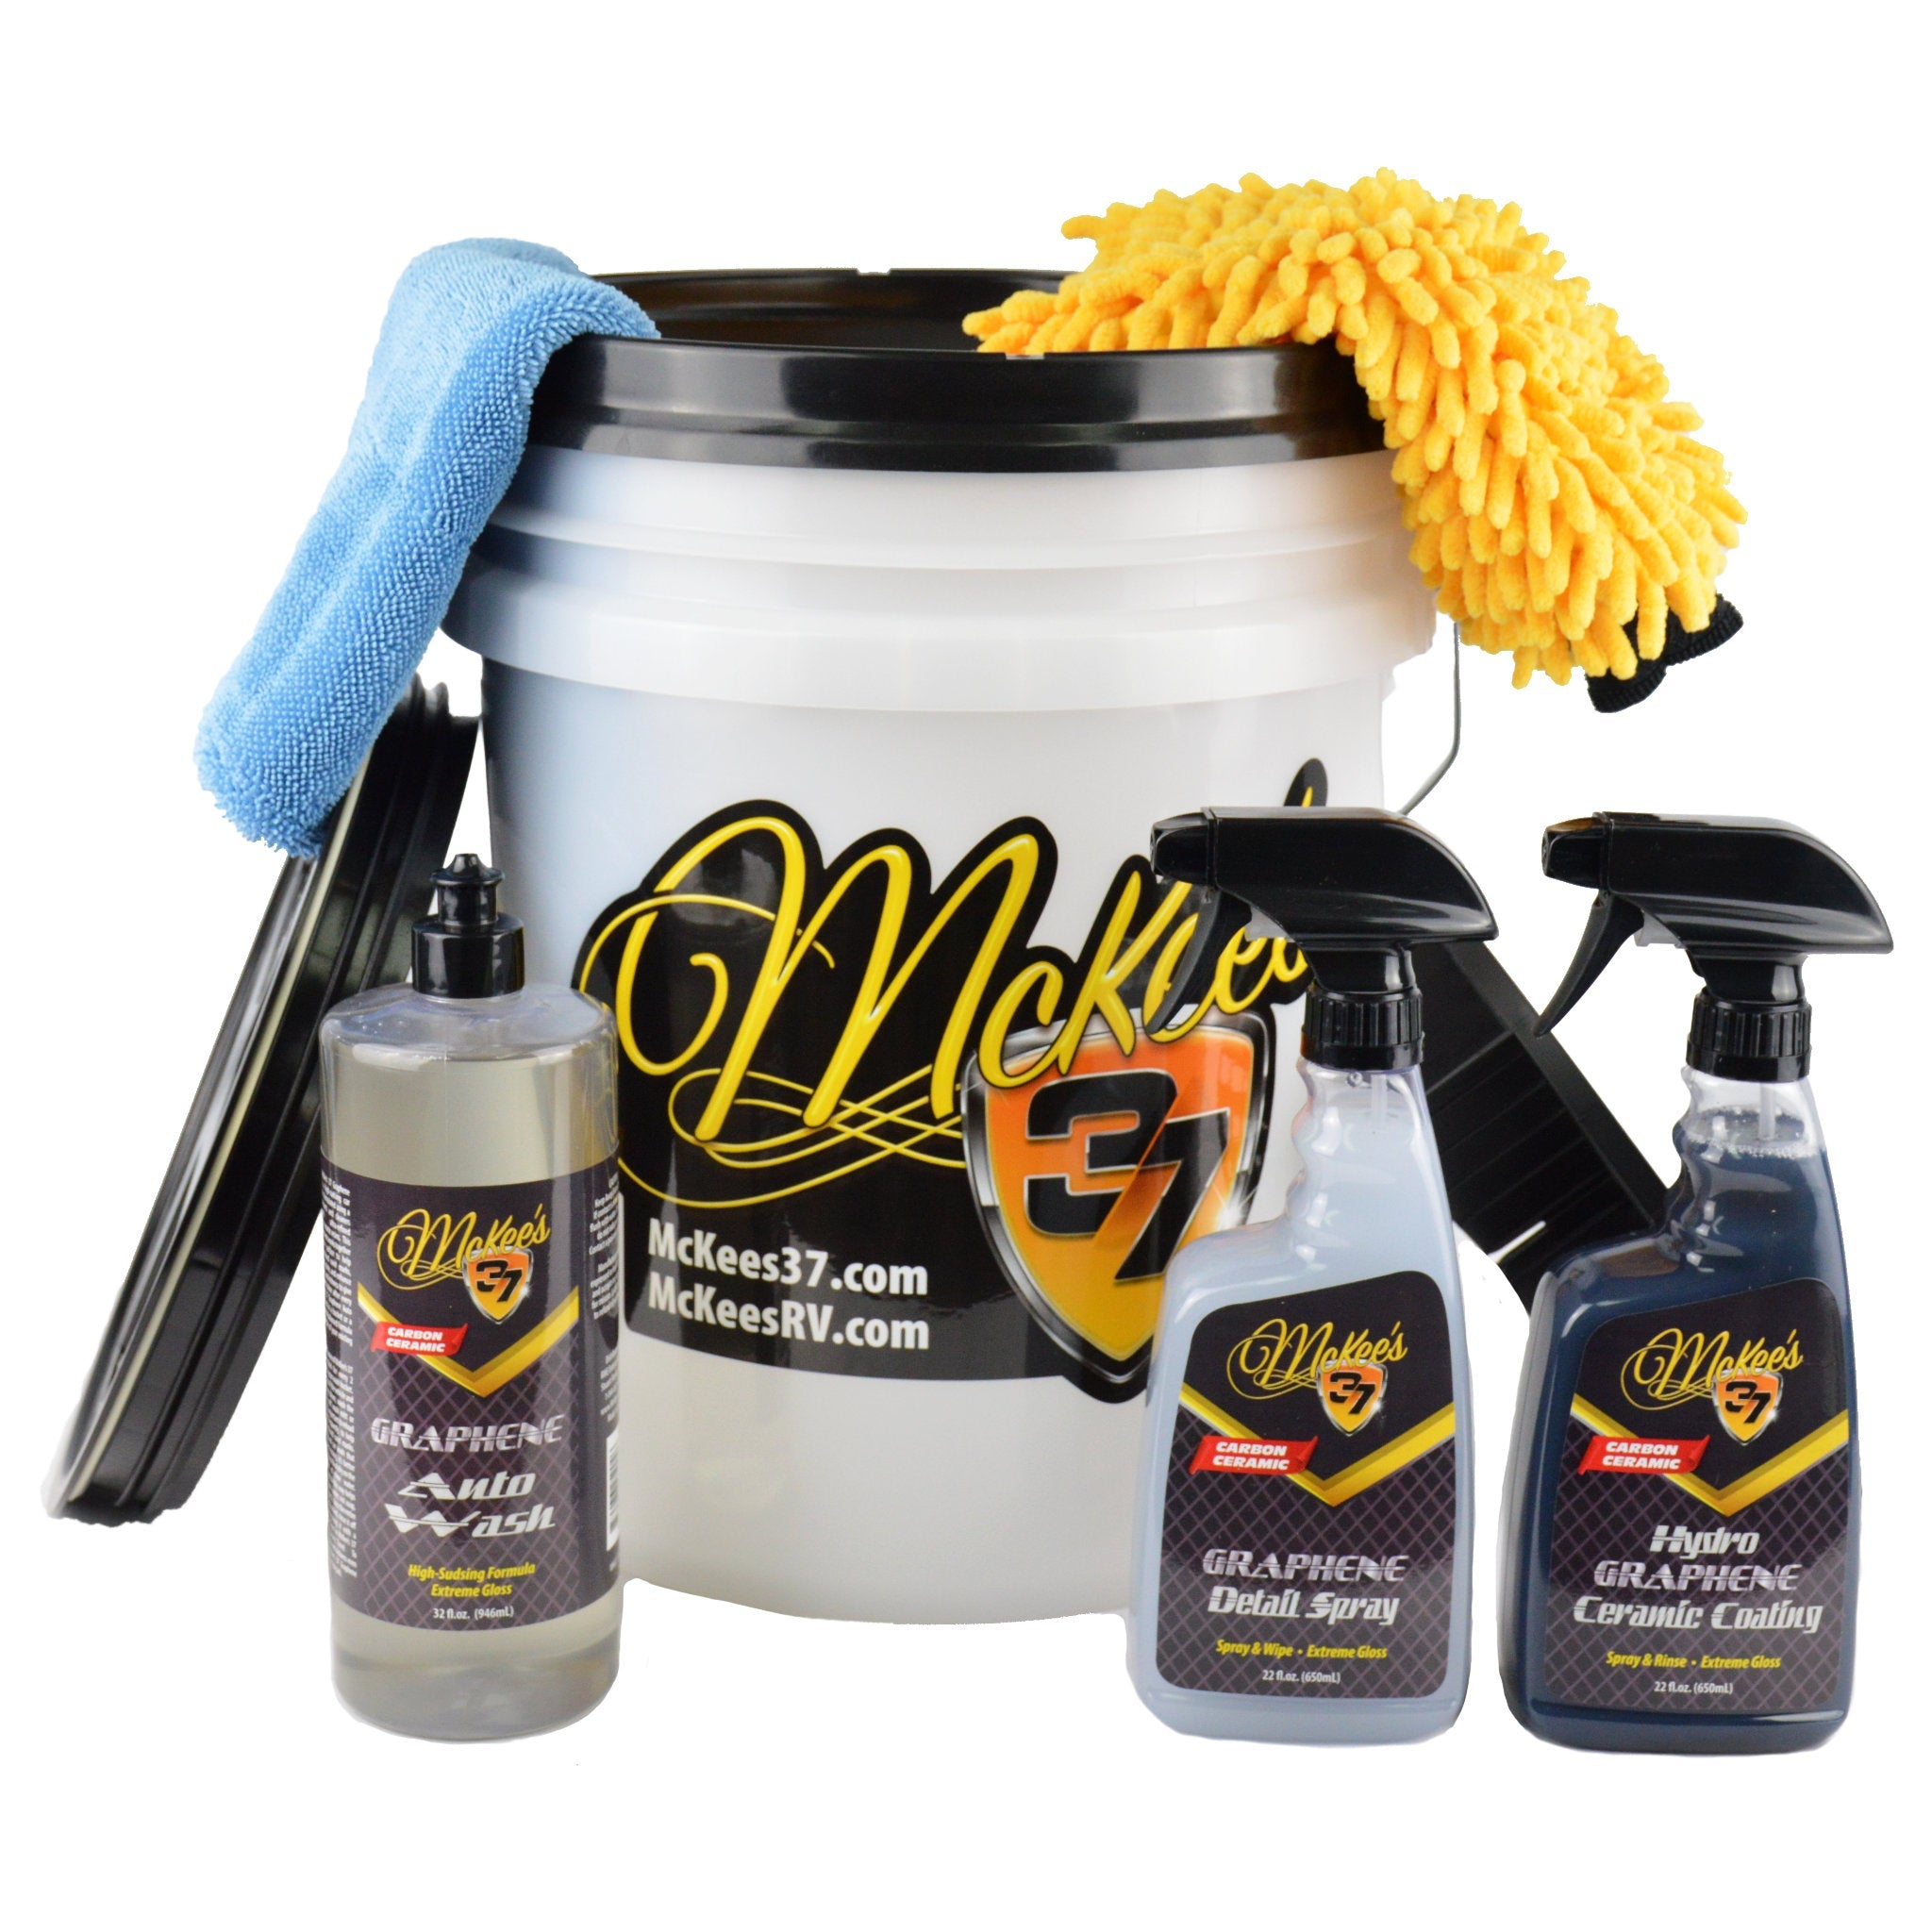 Rupes® — Detailers Choice Car Care